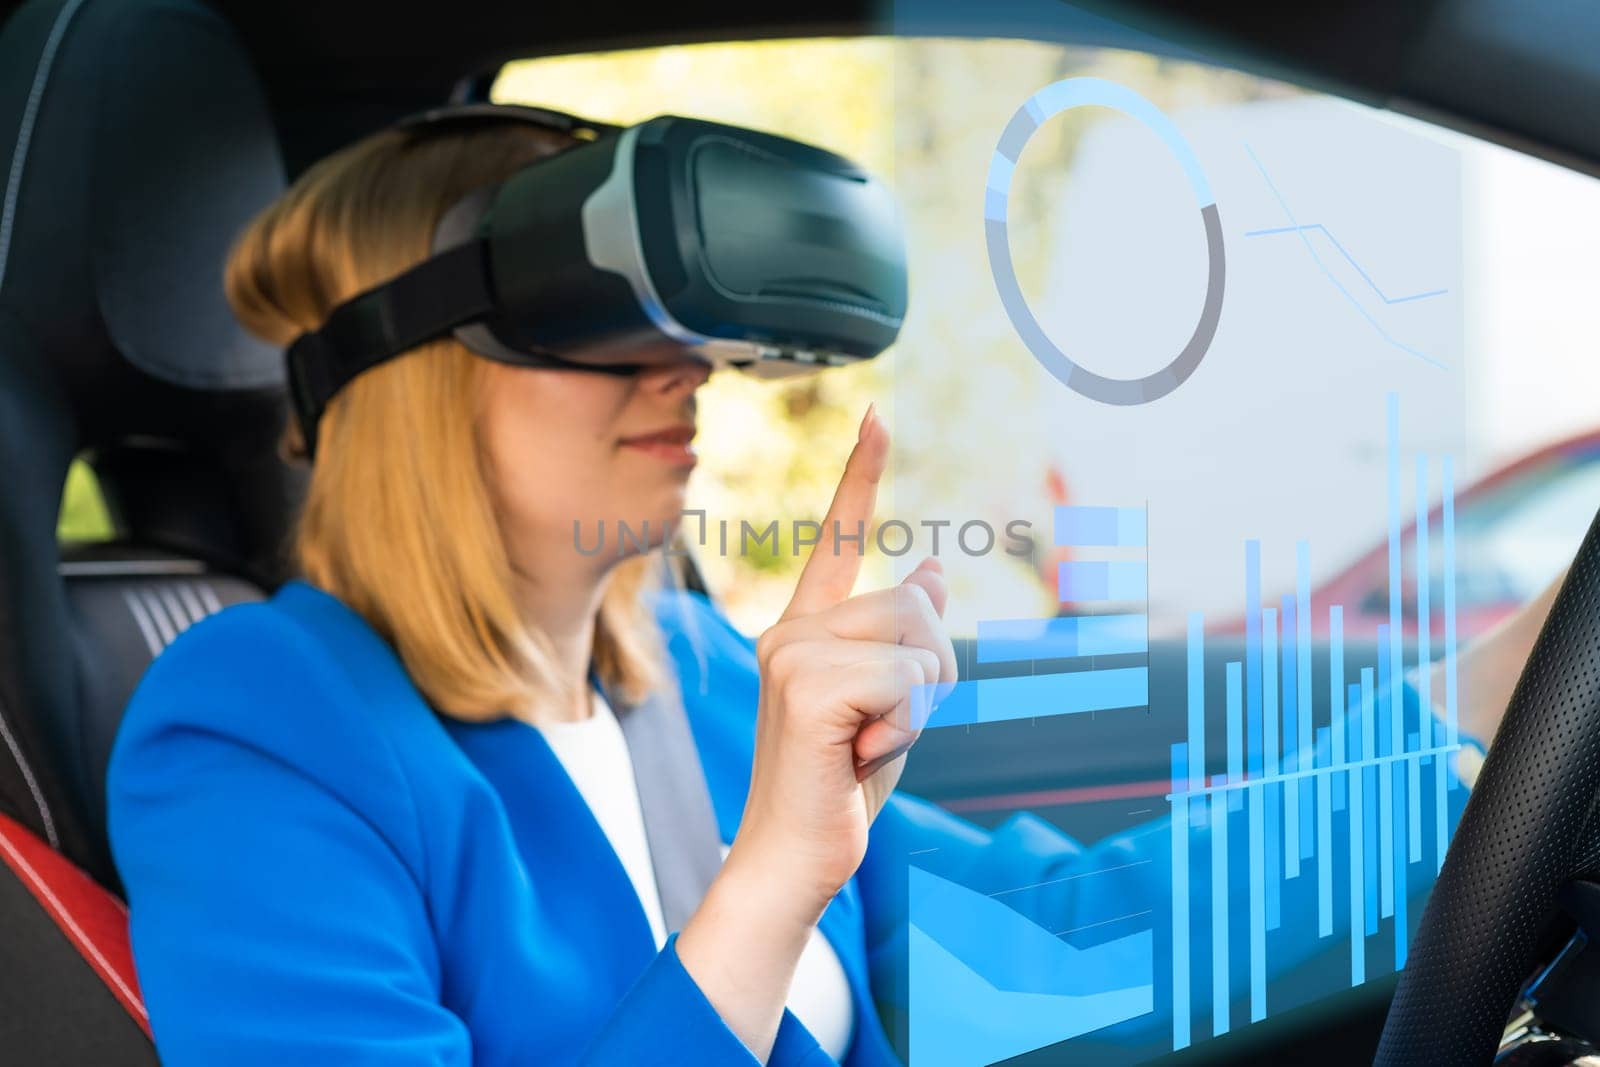 Digitally generated graphics and charts interface managed by business woman in vr googles sitting in the car in a blue suit. Metaverse cyber world technology concept.